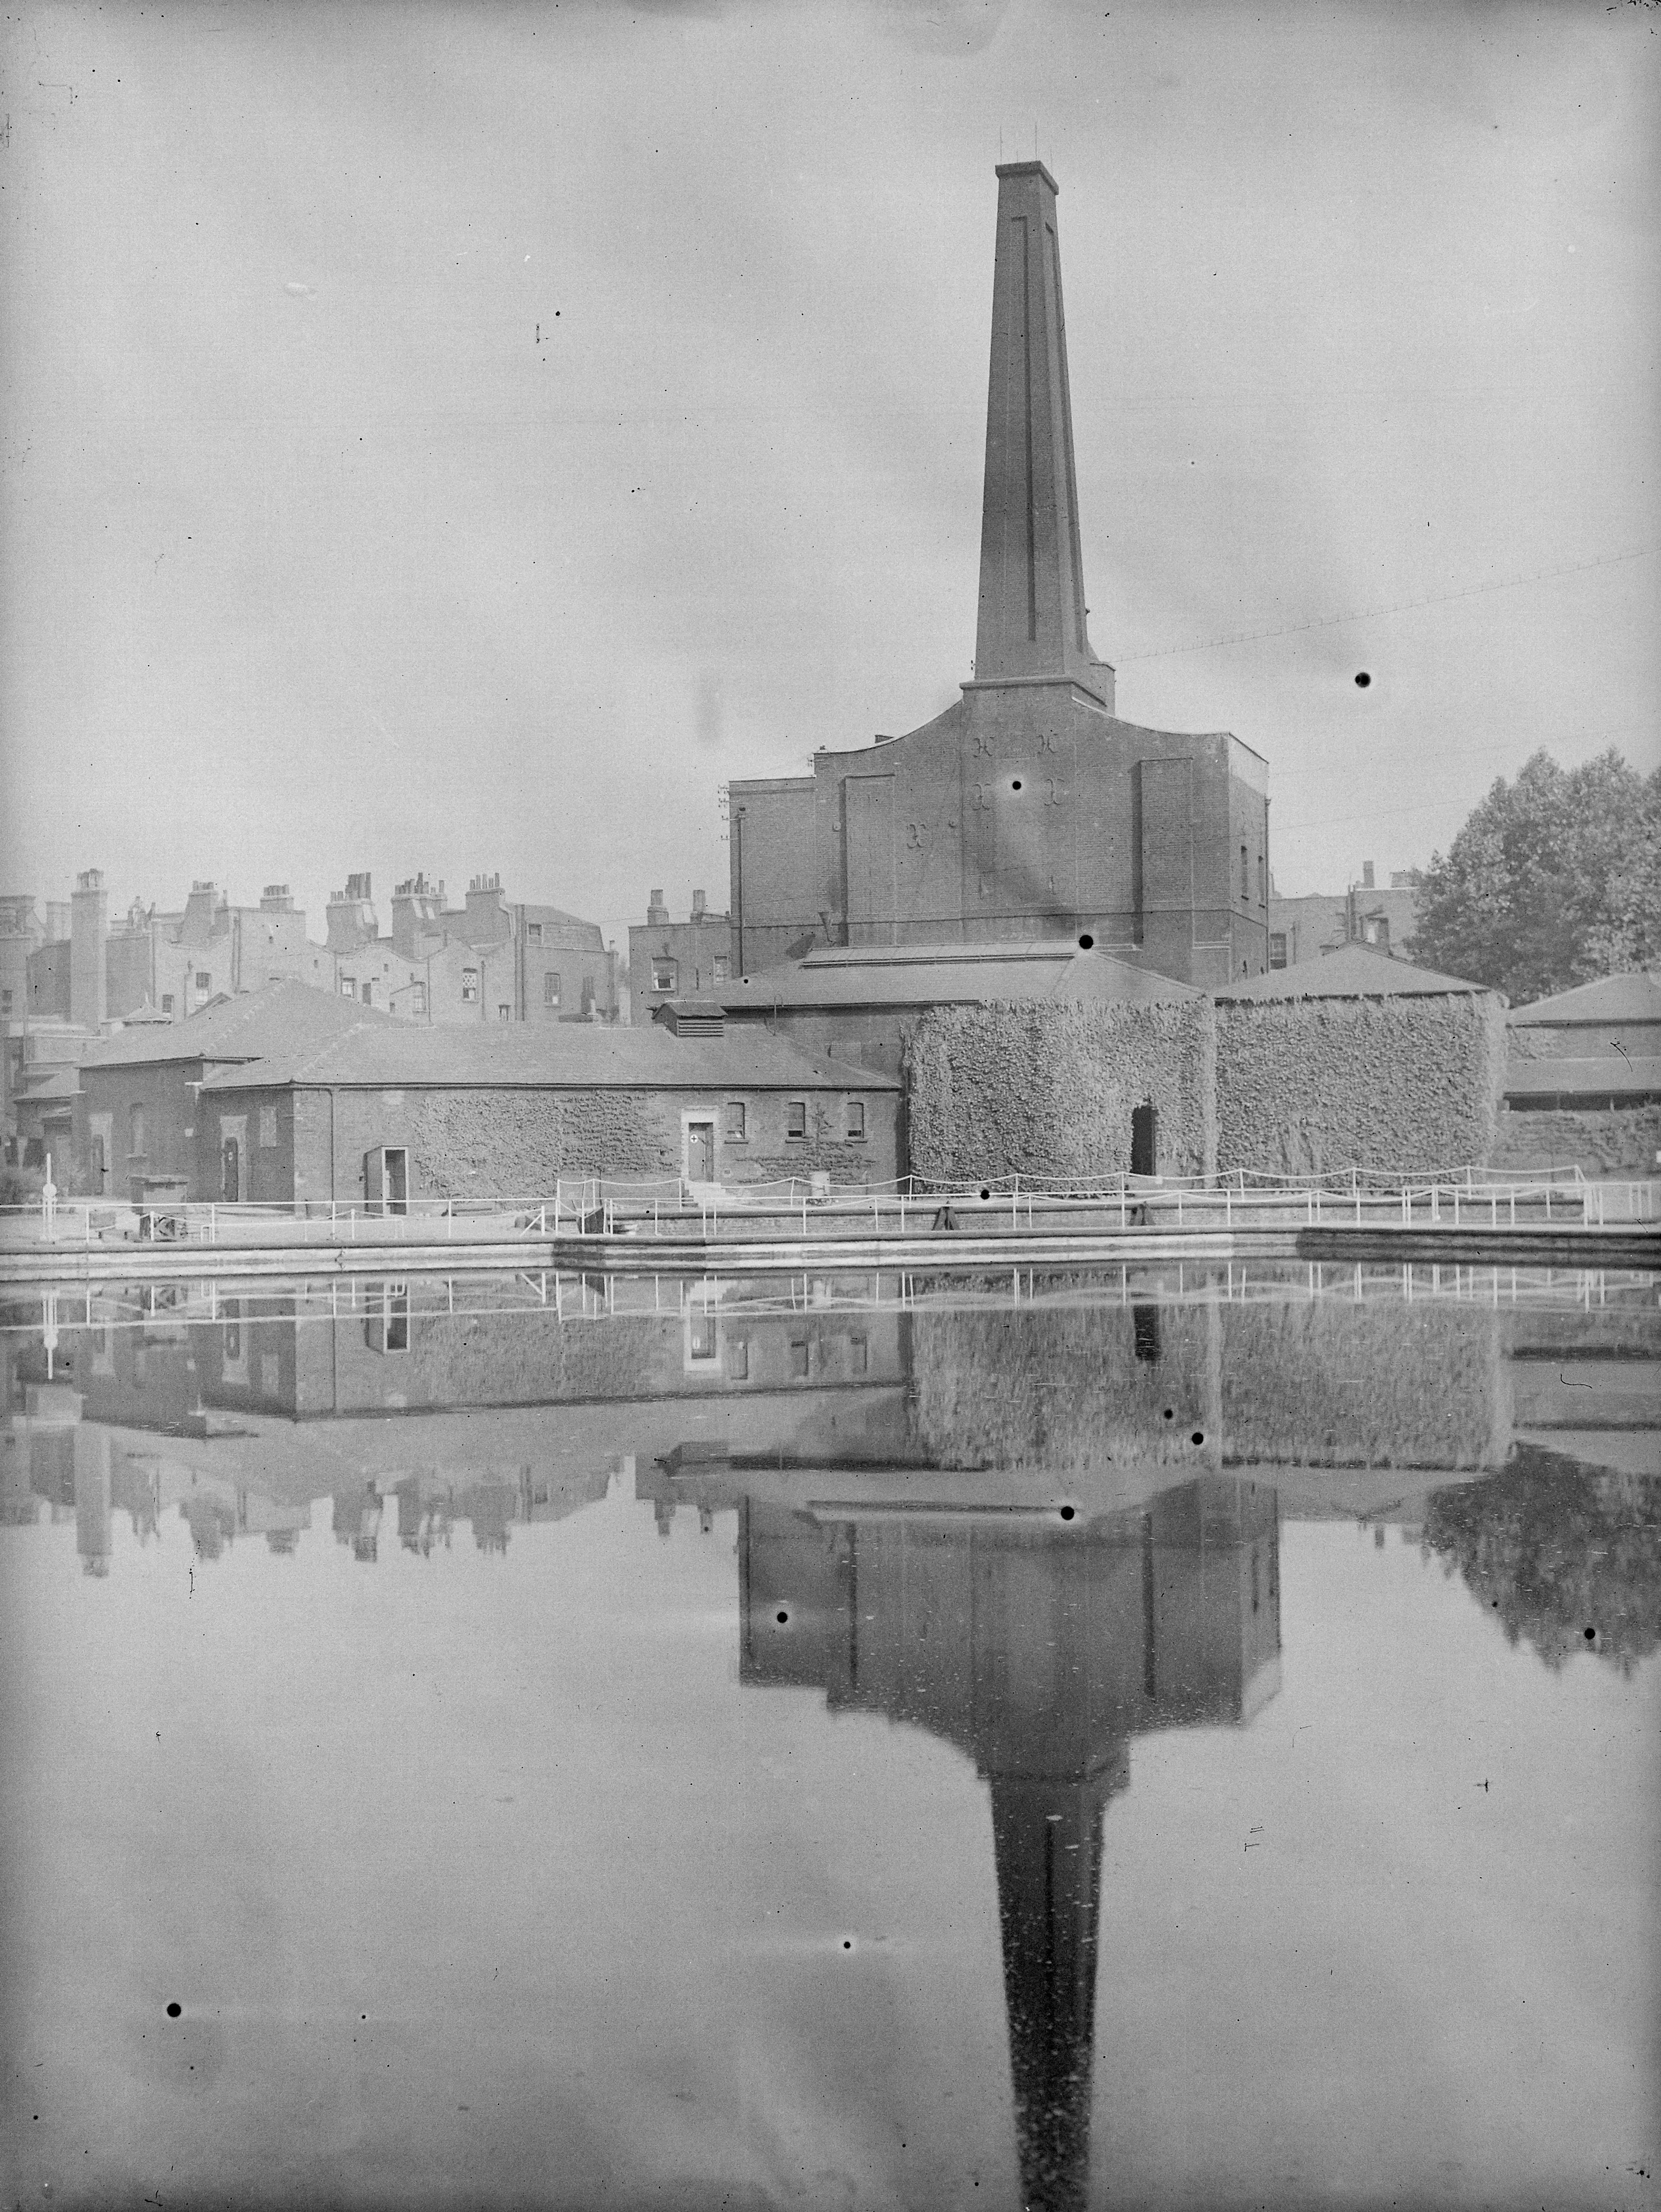 Black and white photograph of industrial brick buildings reflected in a pond in the foreground